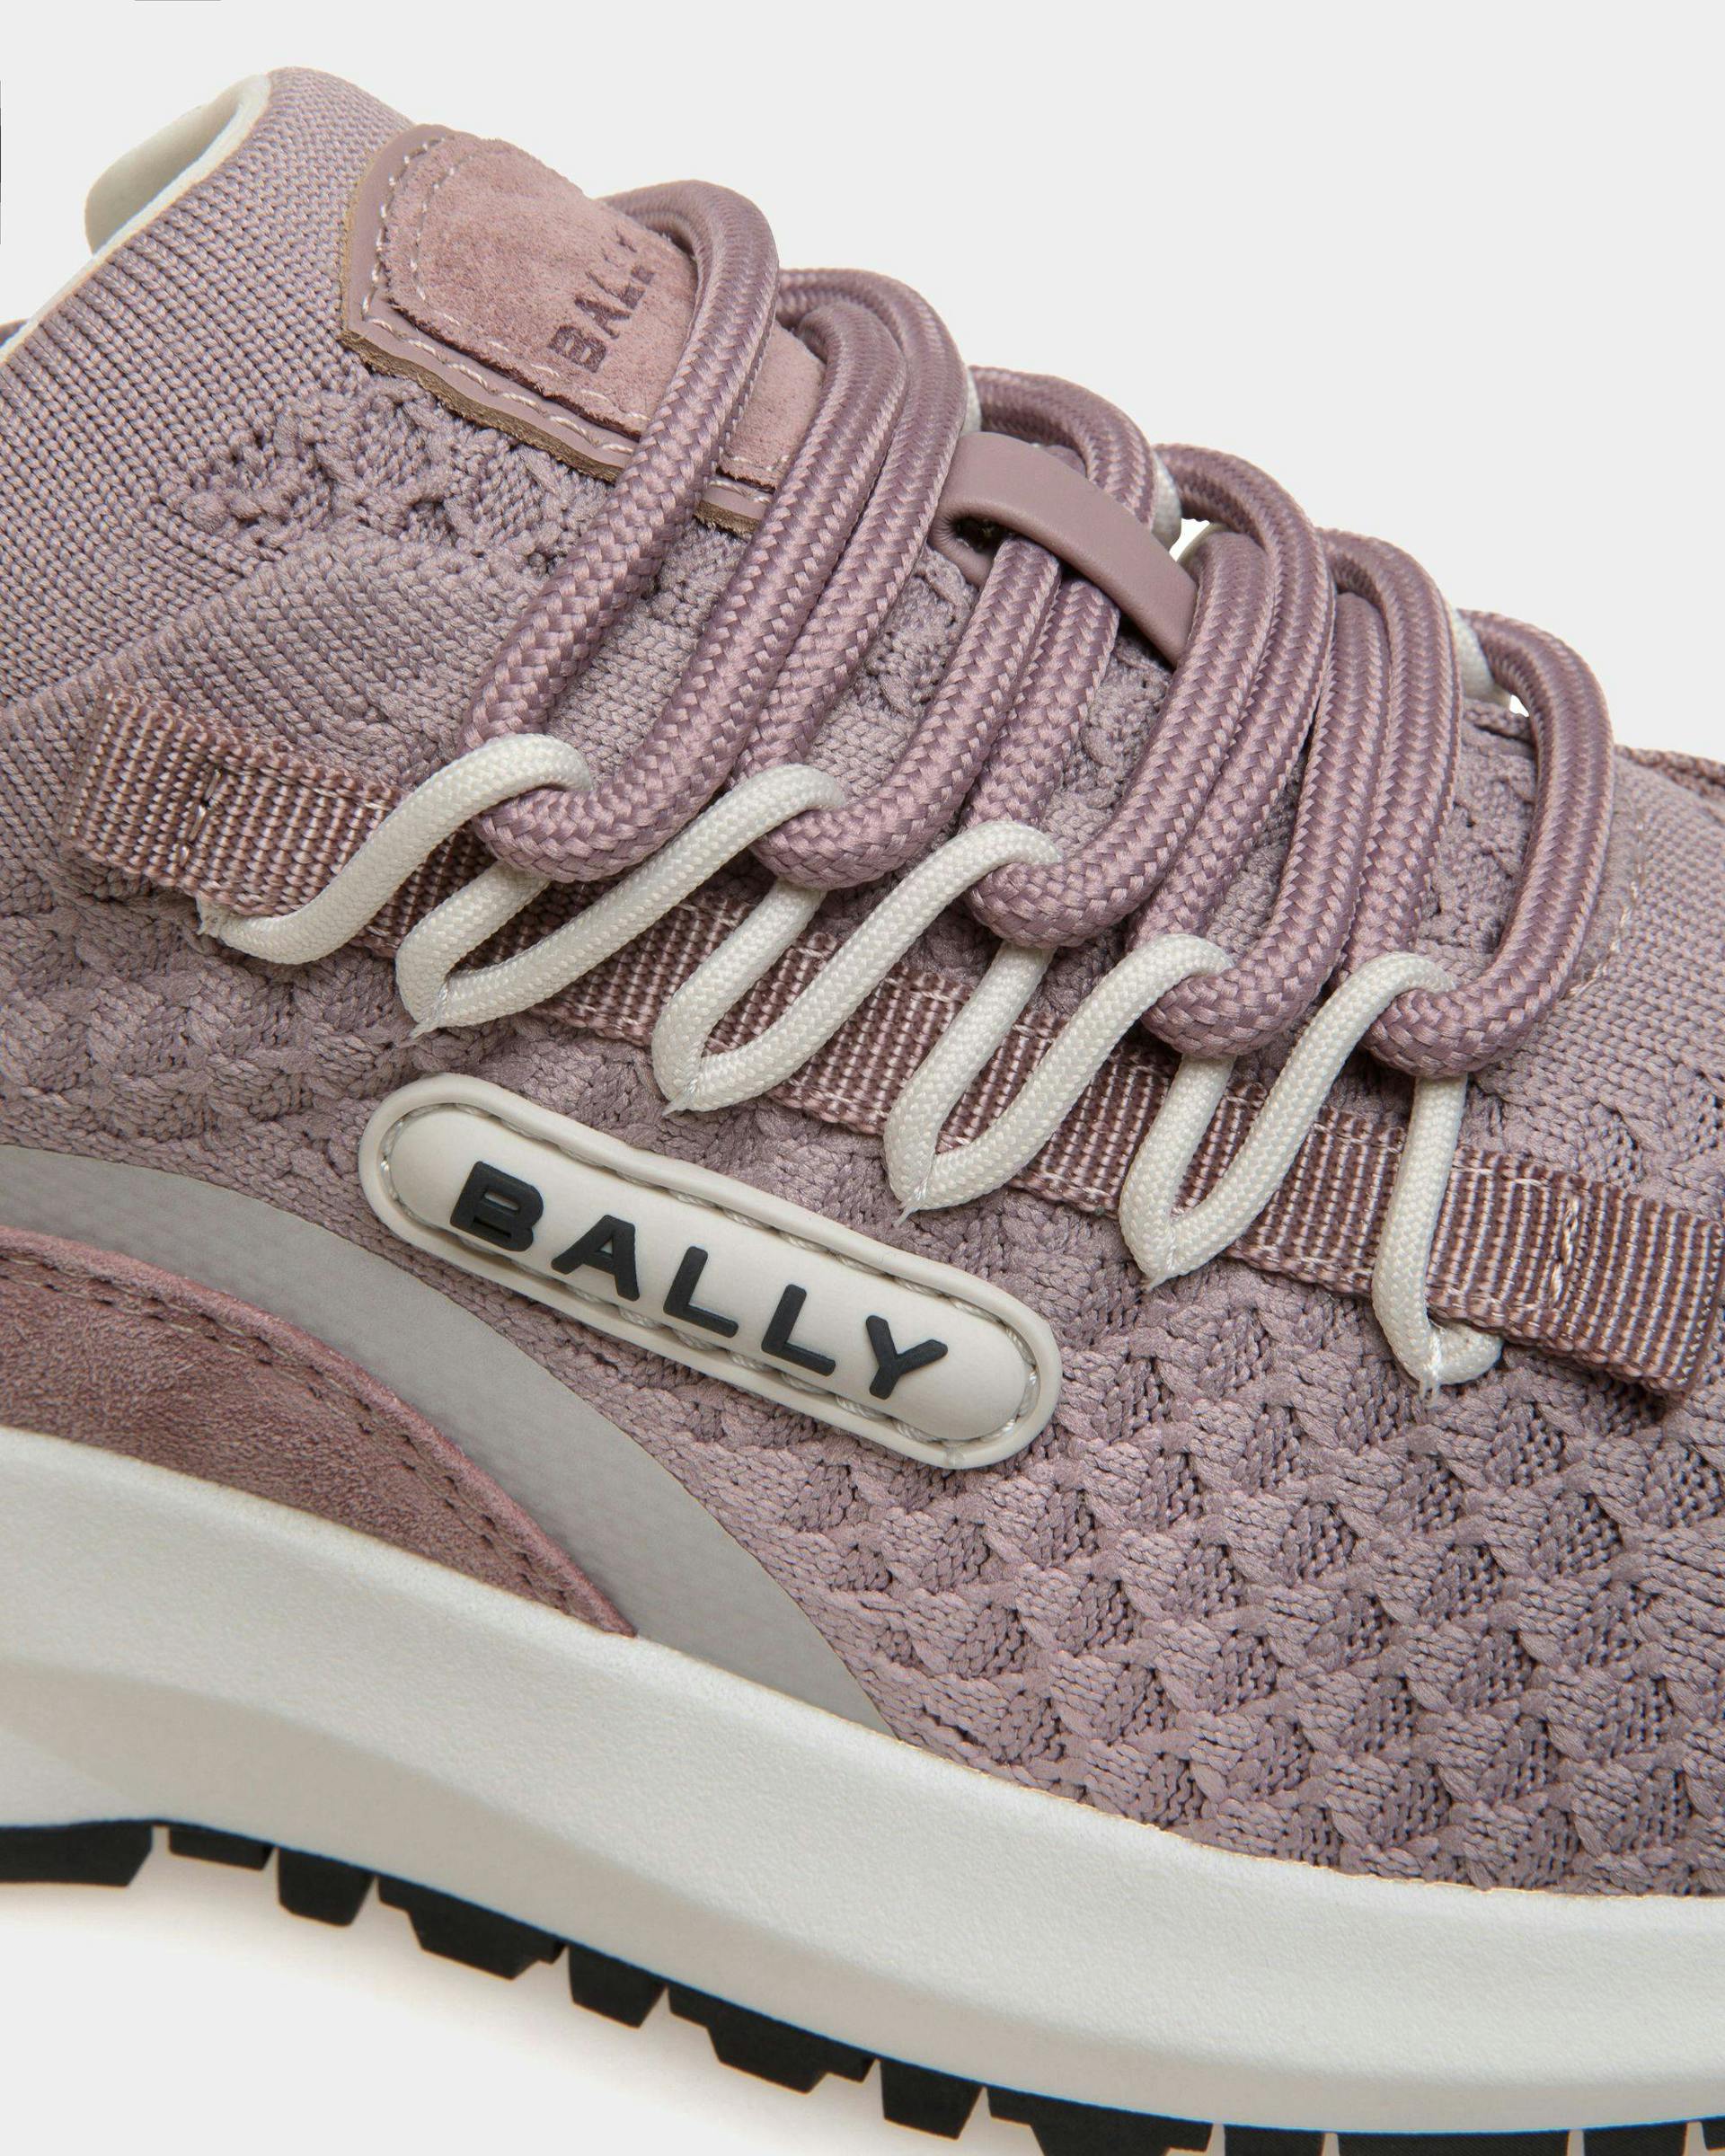 Women's Outline Low-top Sneaker in Knit Fabric | Bally | Still Life Detail